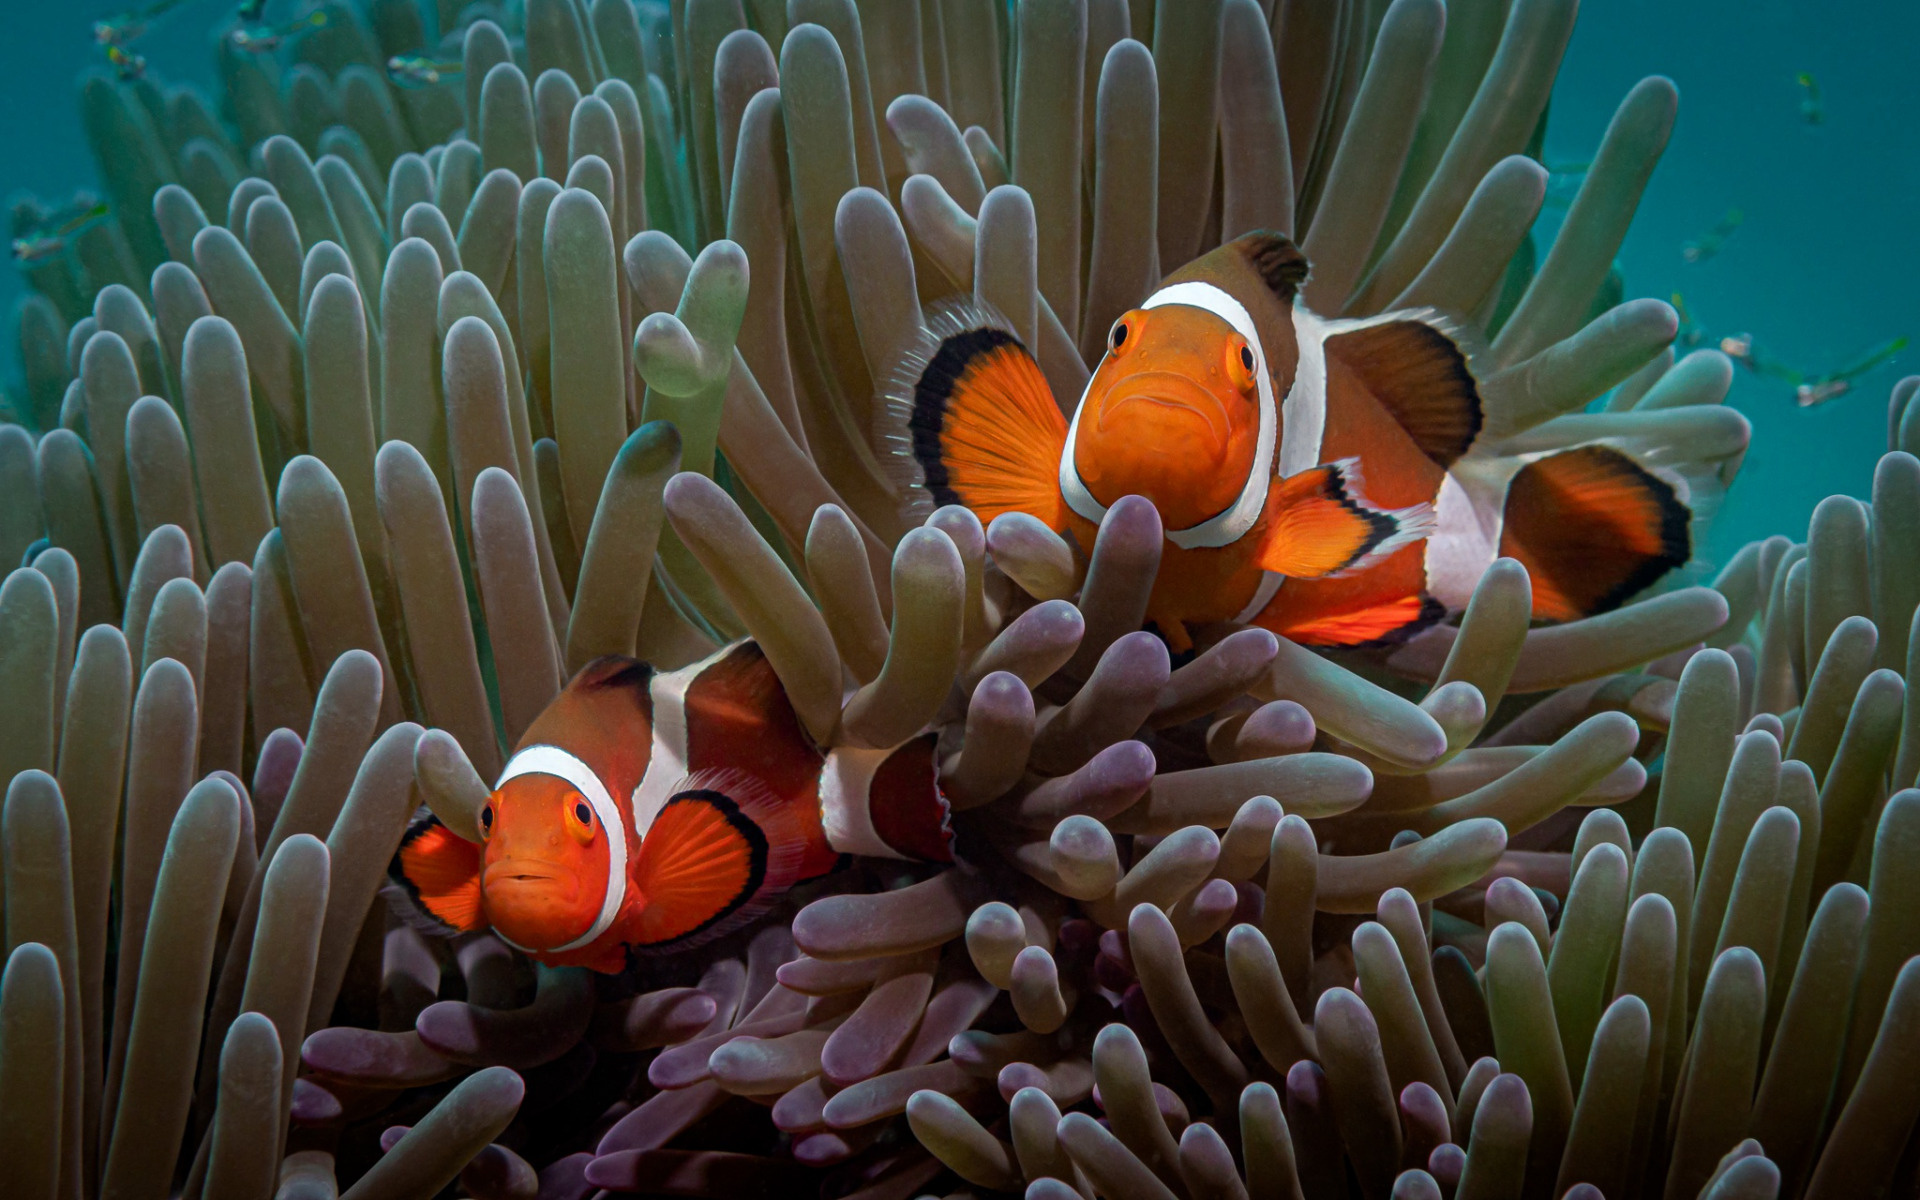 Clown Fish: A pair of anemonefish in their anemone home, Underwater. 1920x1200 HD Wallpaper.